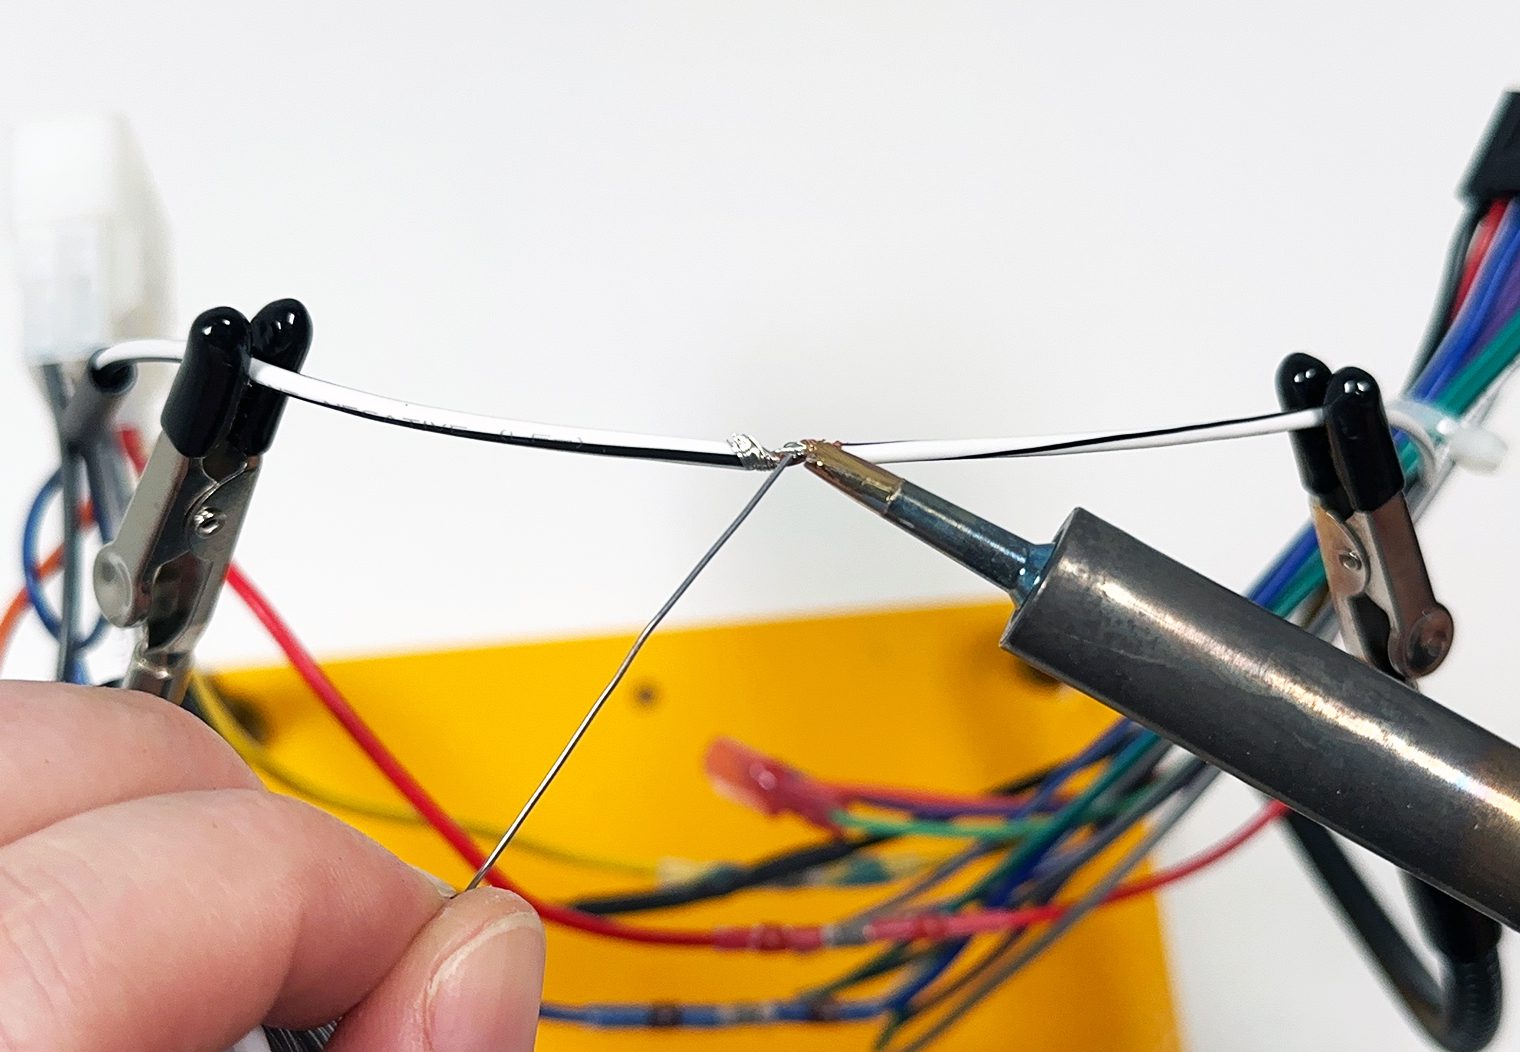 Soldering two wires together with solder iron